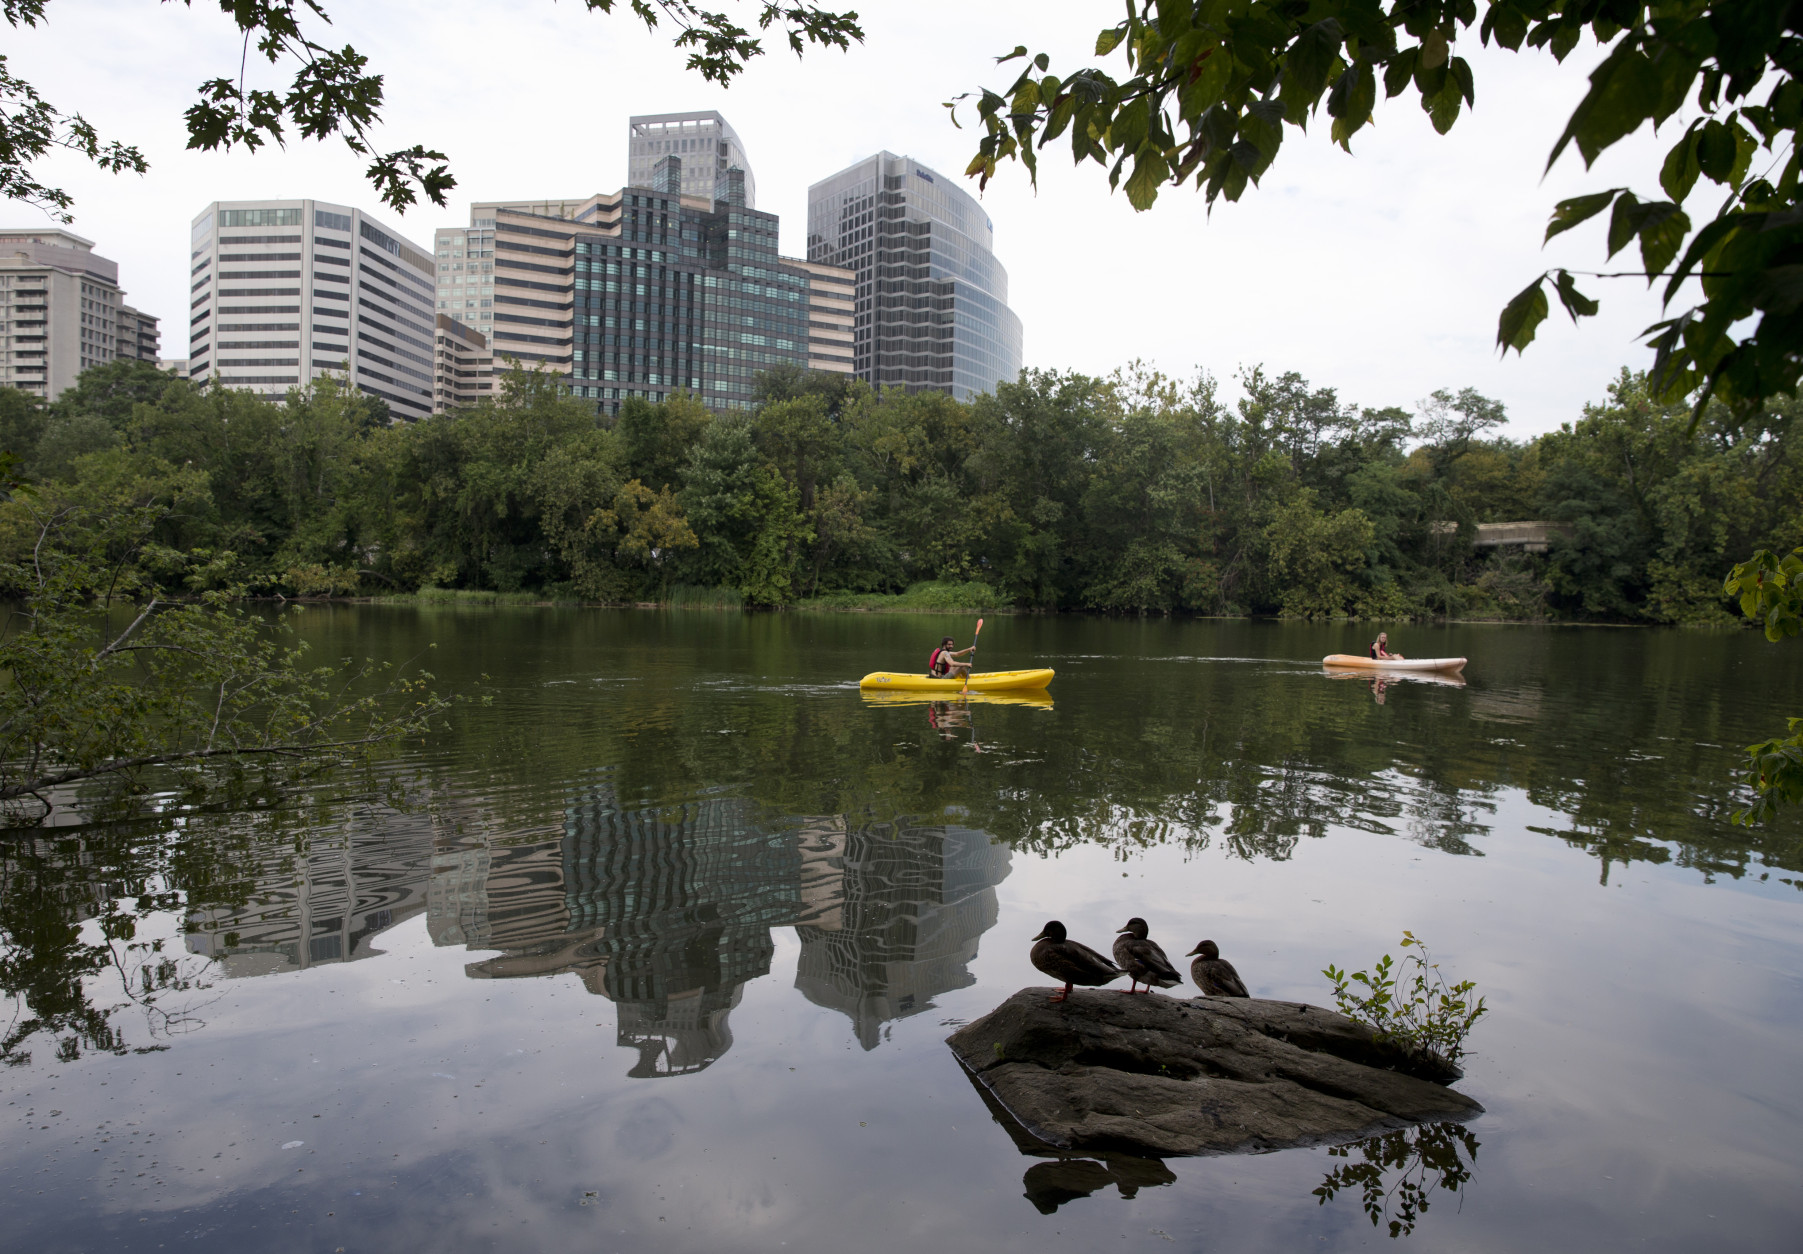 The move will consolidate 994 existing Grant Thornton jobs to 1000 Wilson Blvd. in Rosslyn. (AP Photo/Carolyn Kaster)